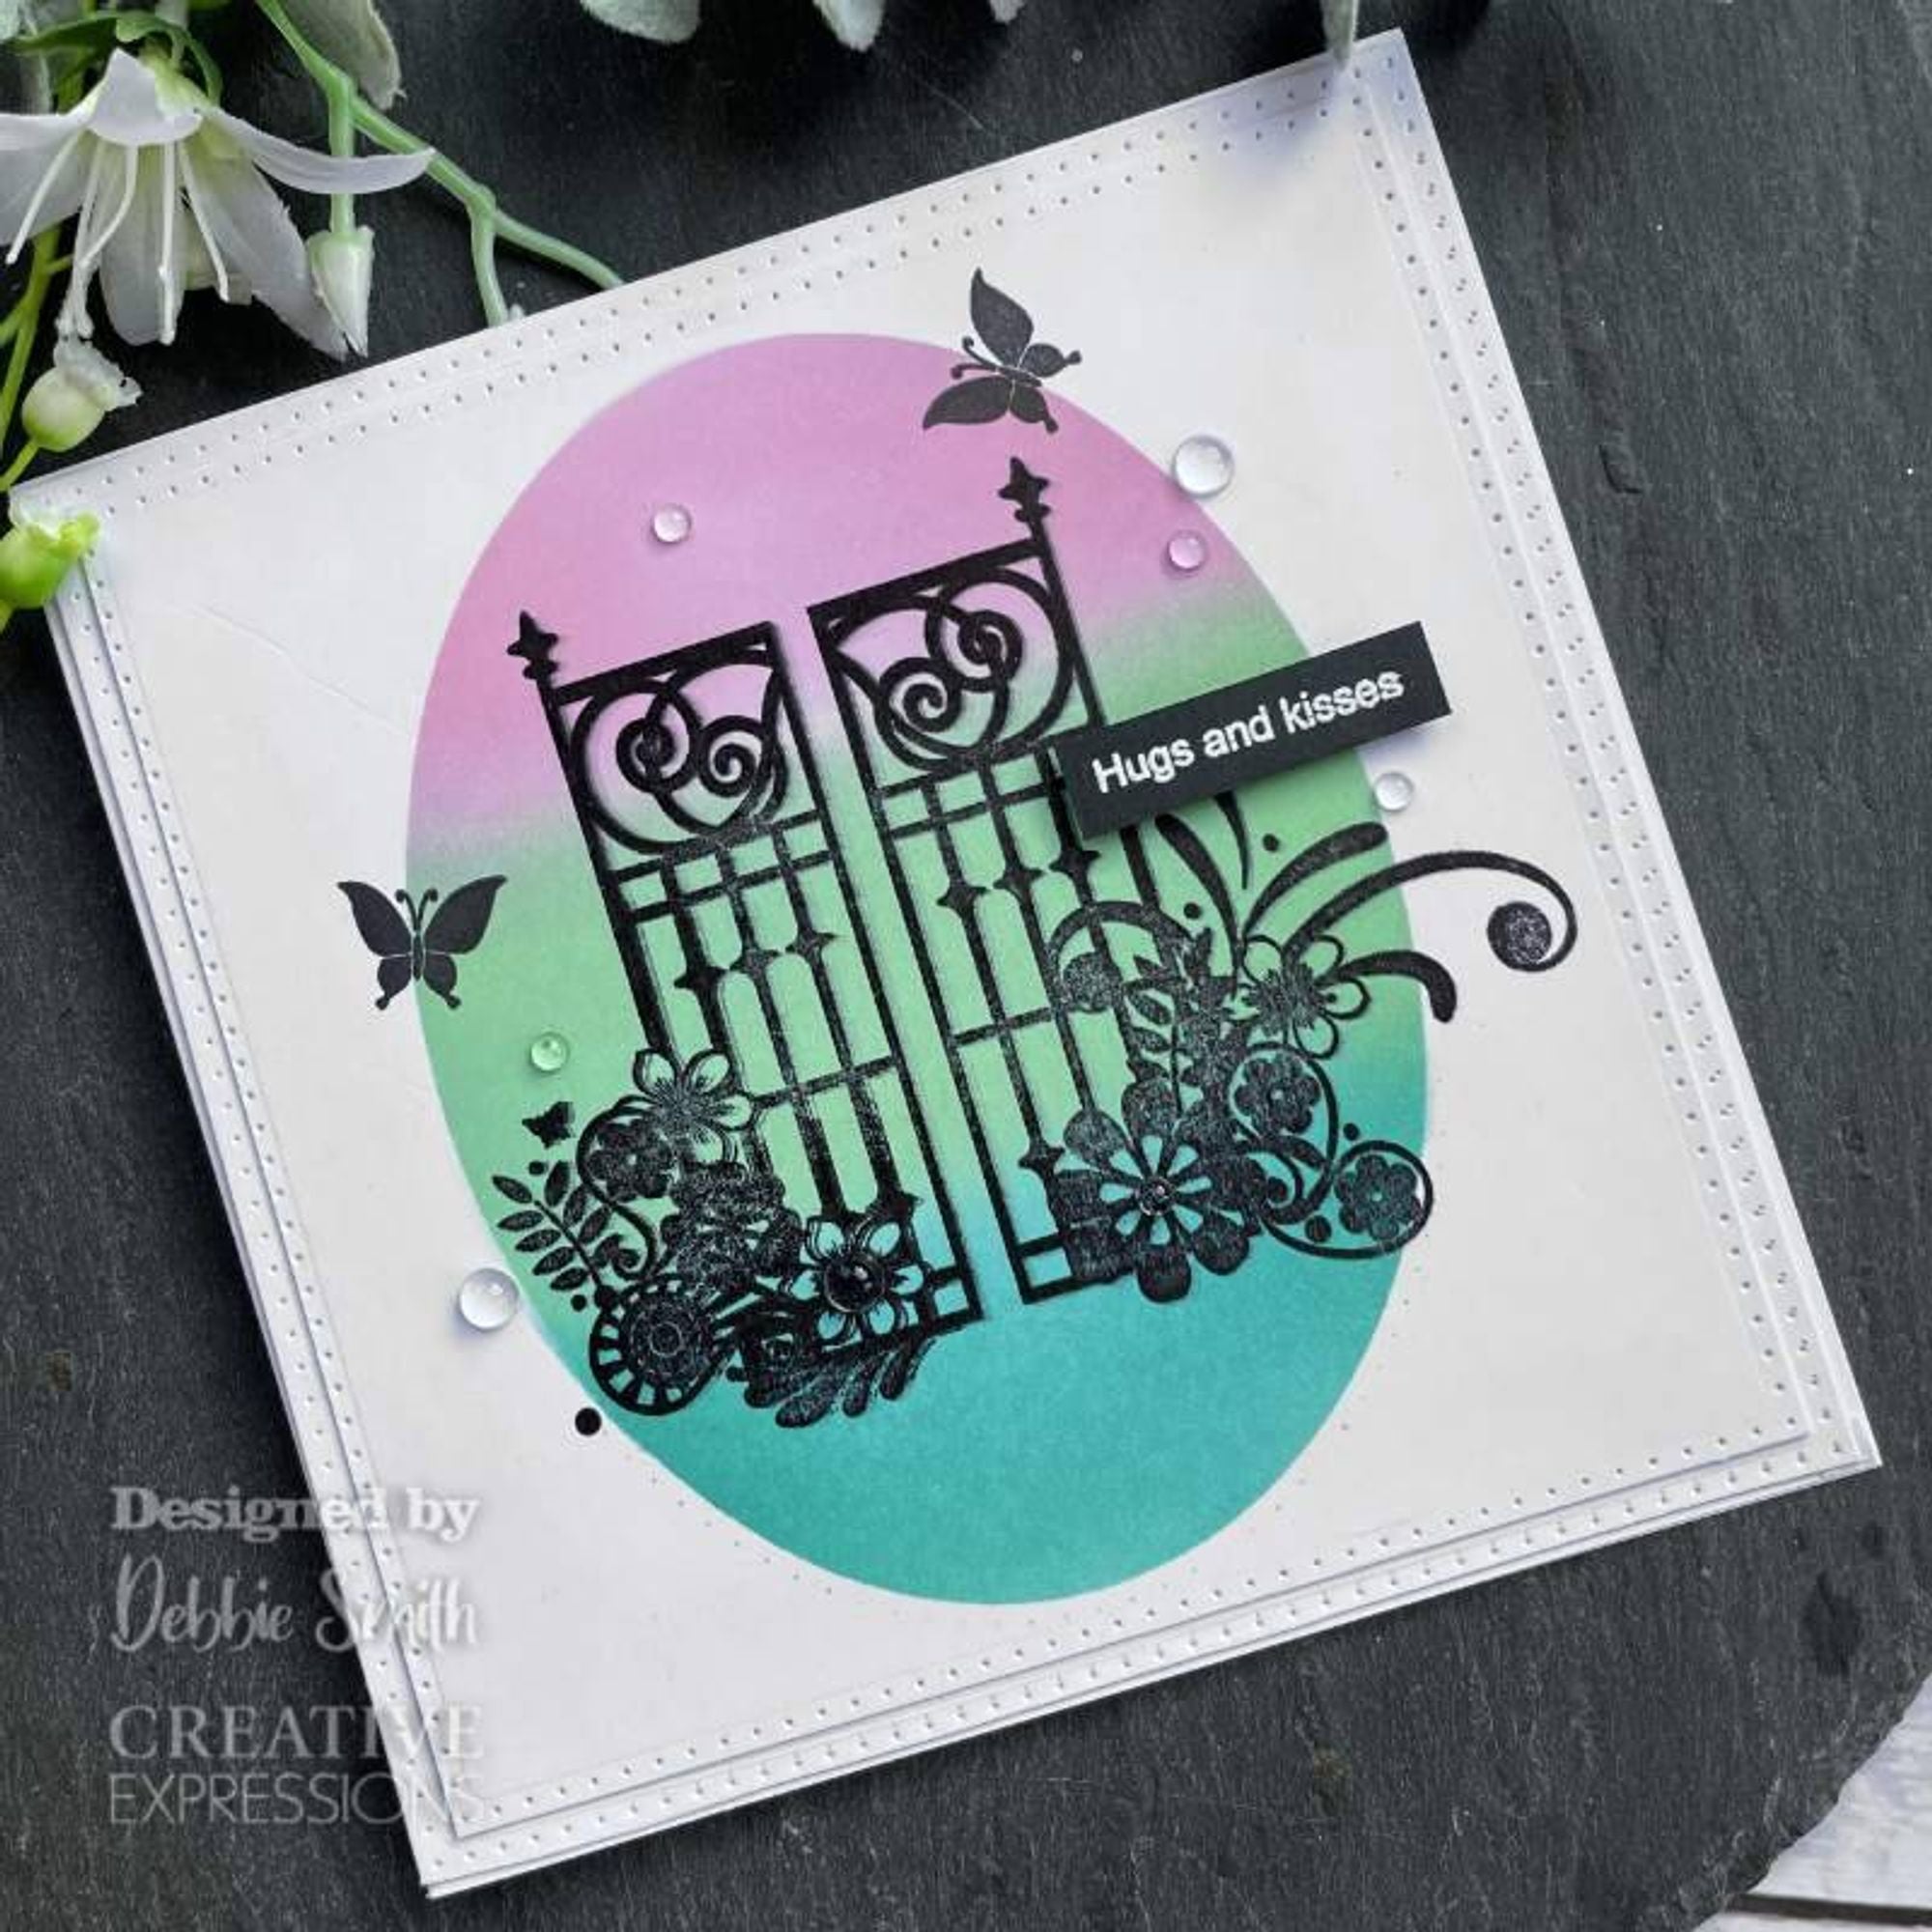 Creative Expressions Designer Boutique Walk On In 6 in x 4 in Clear Stamp Set